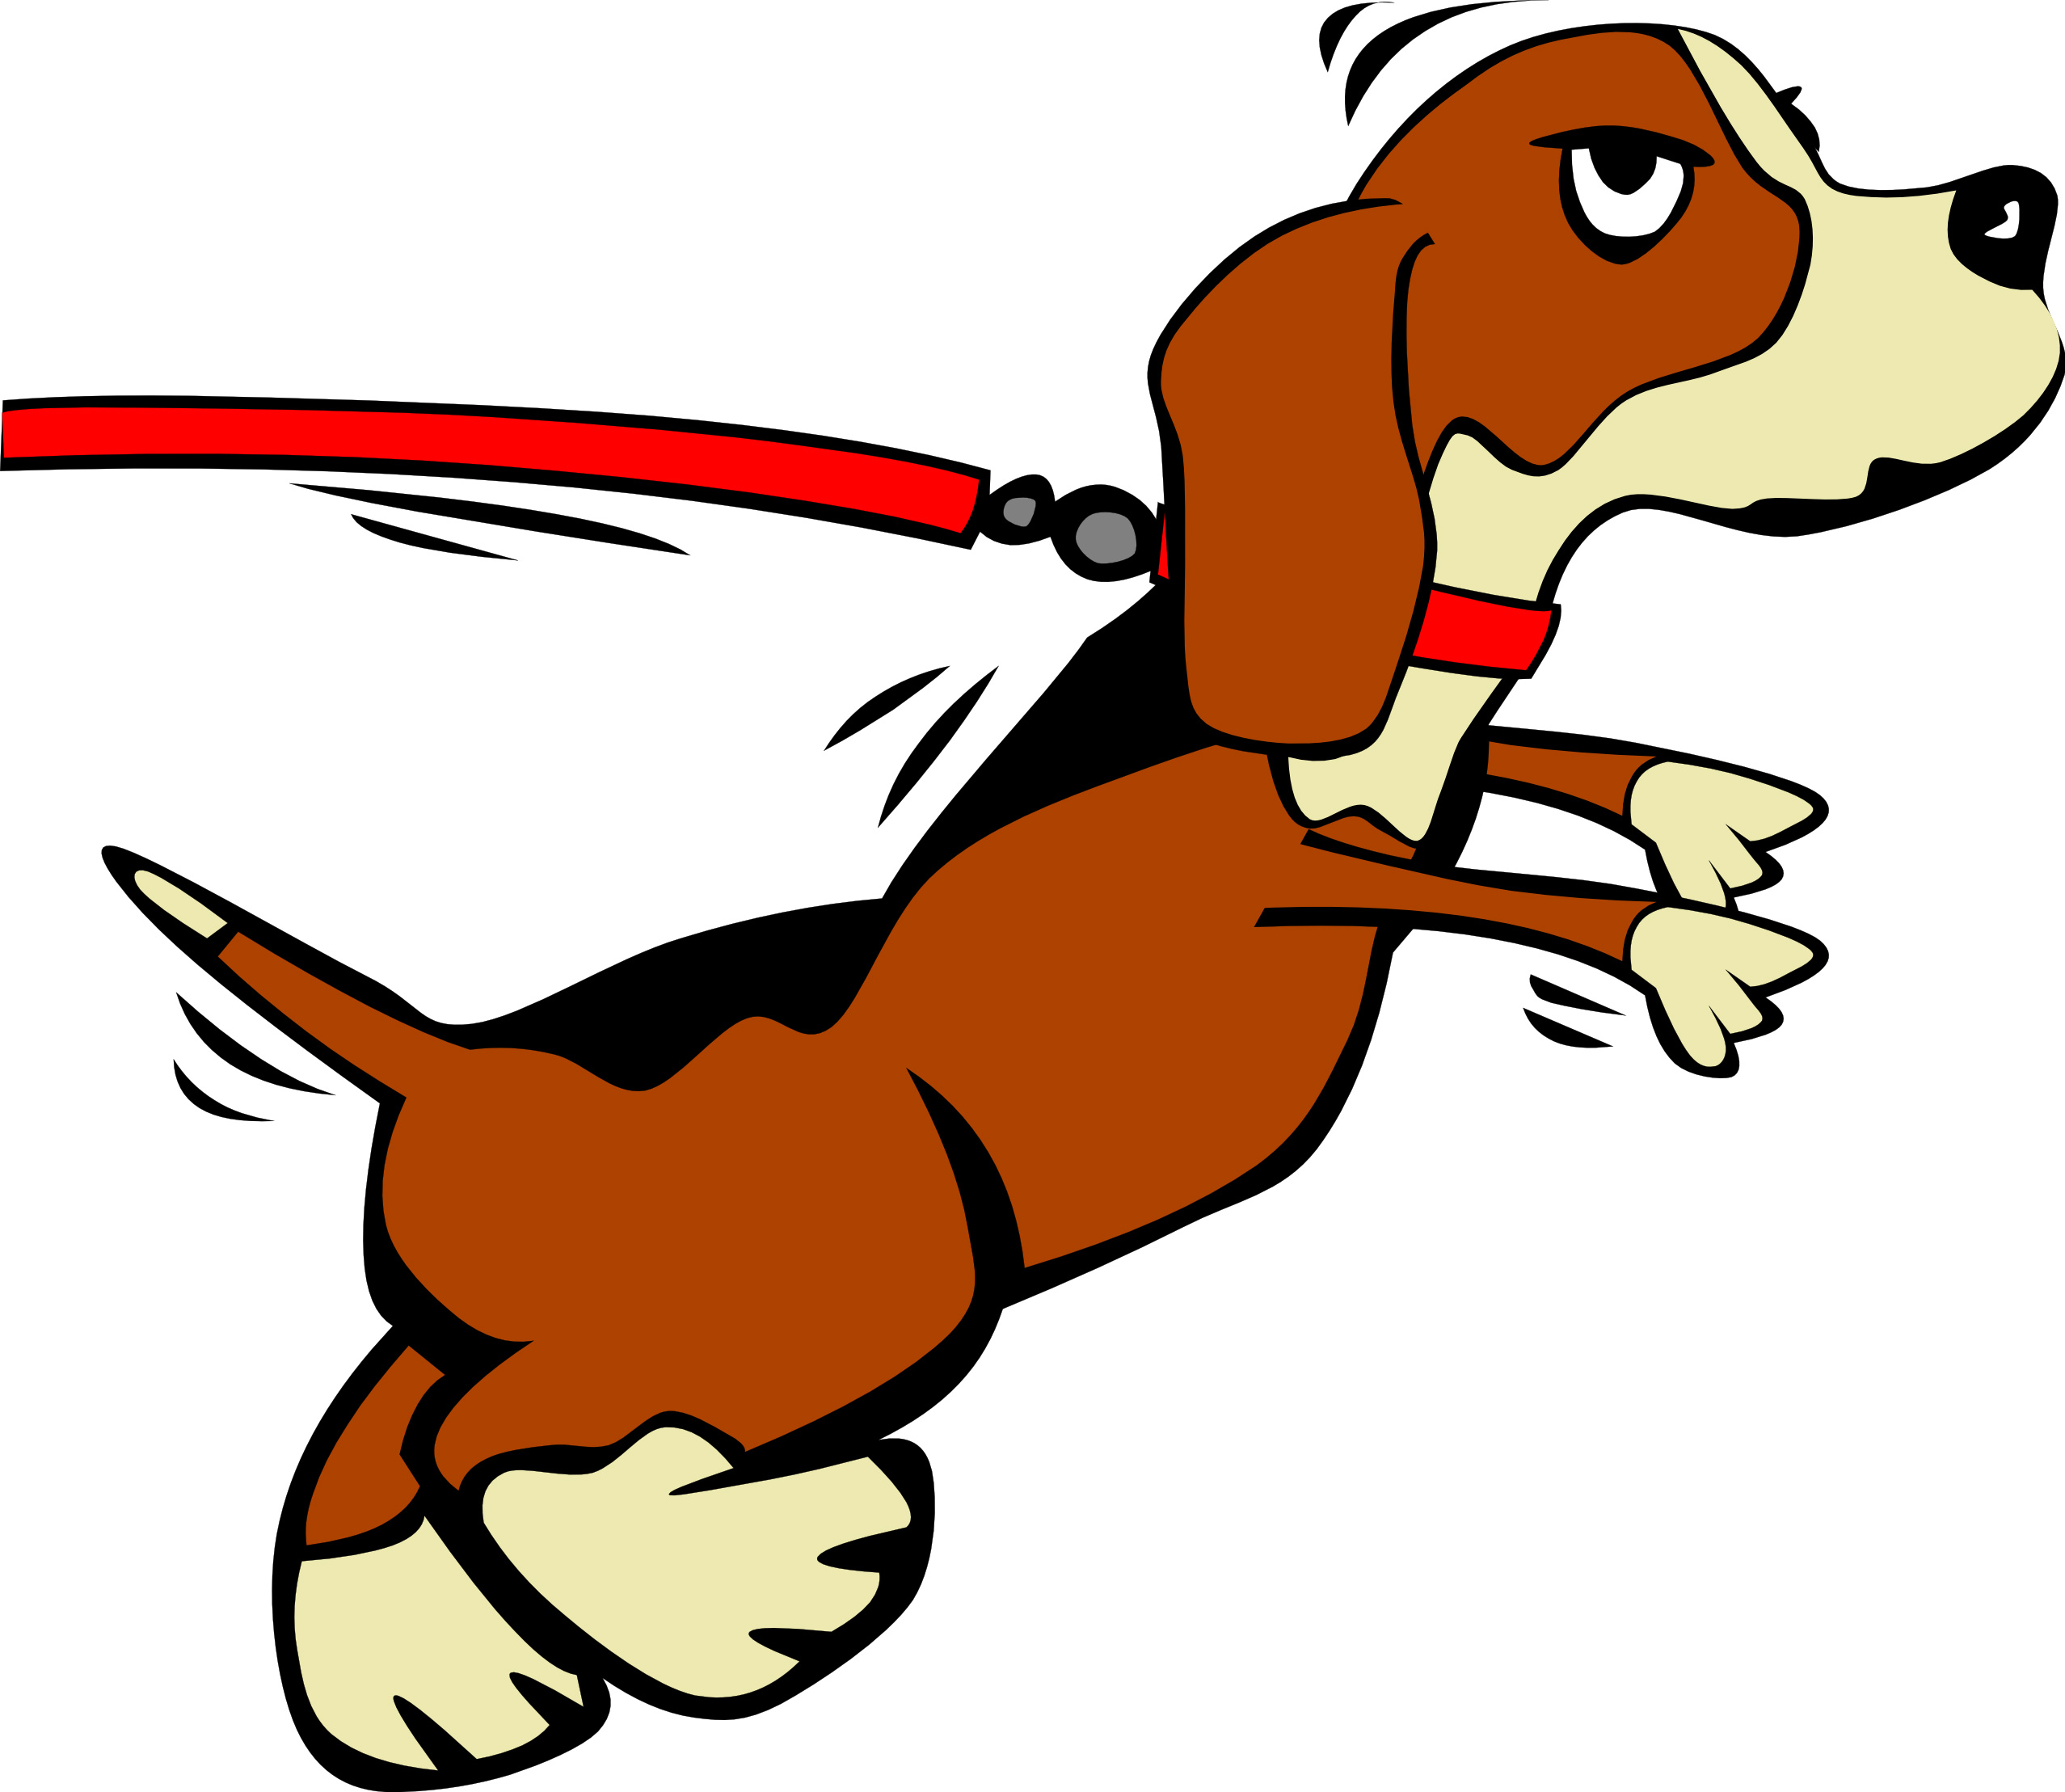 Beagle Dog Cartoon Pictures and Wallpapers